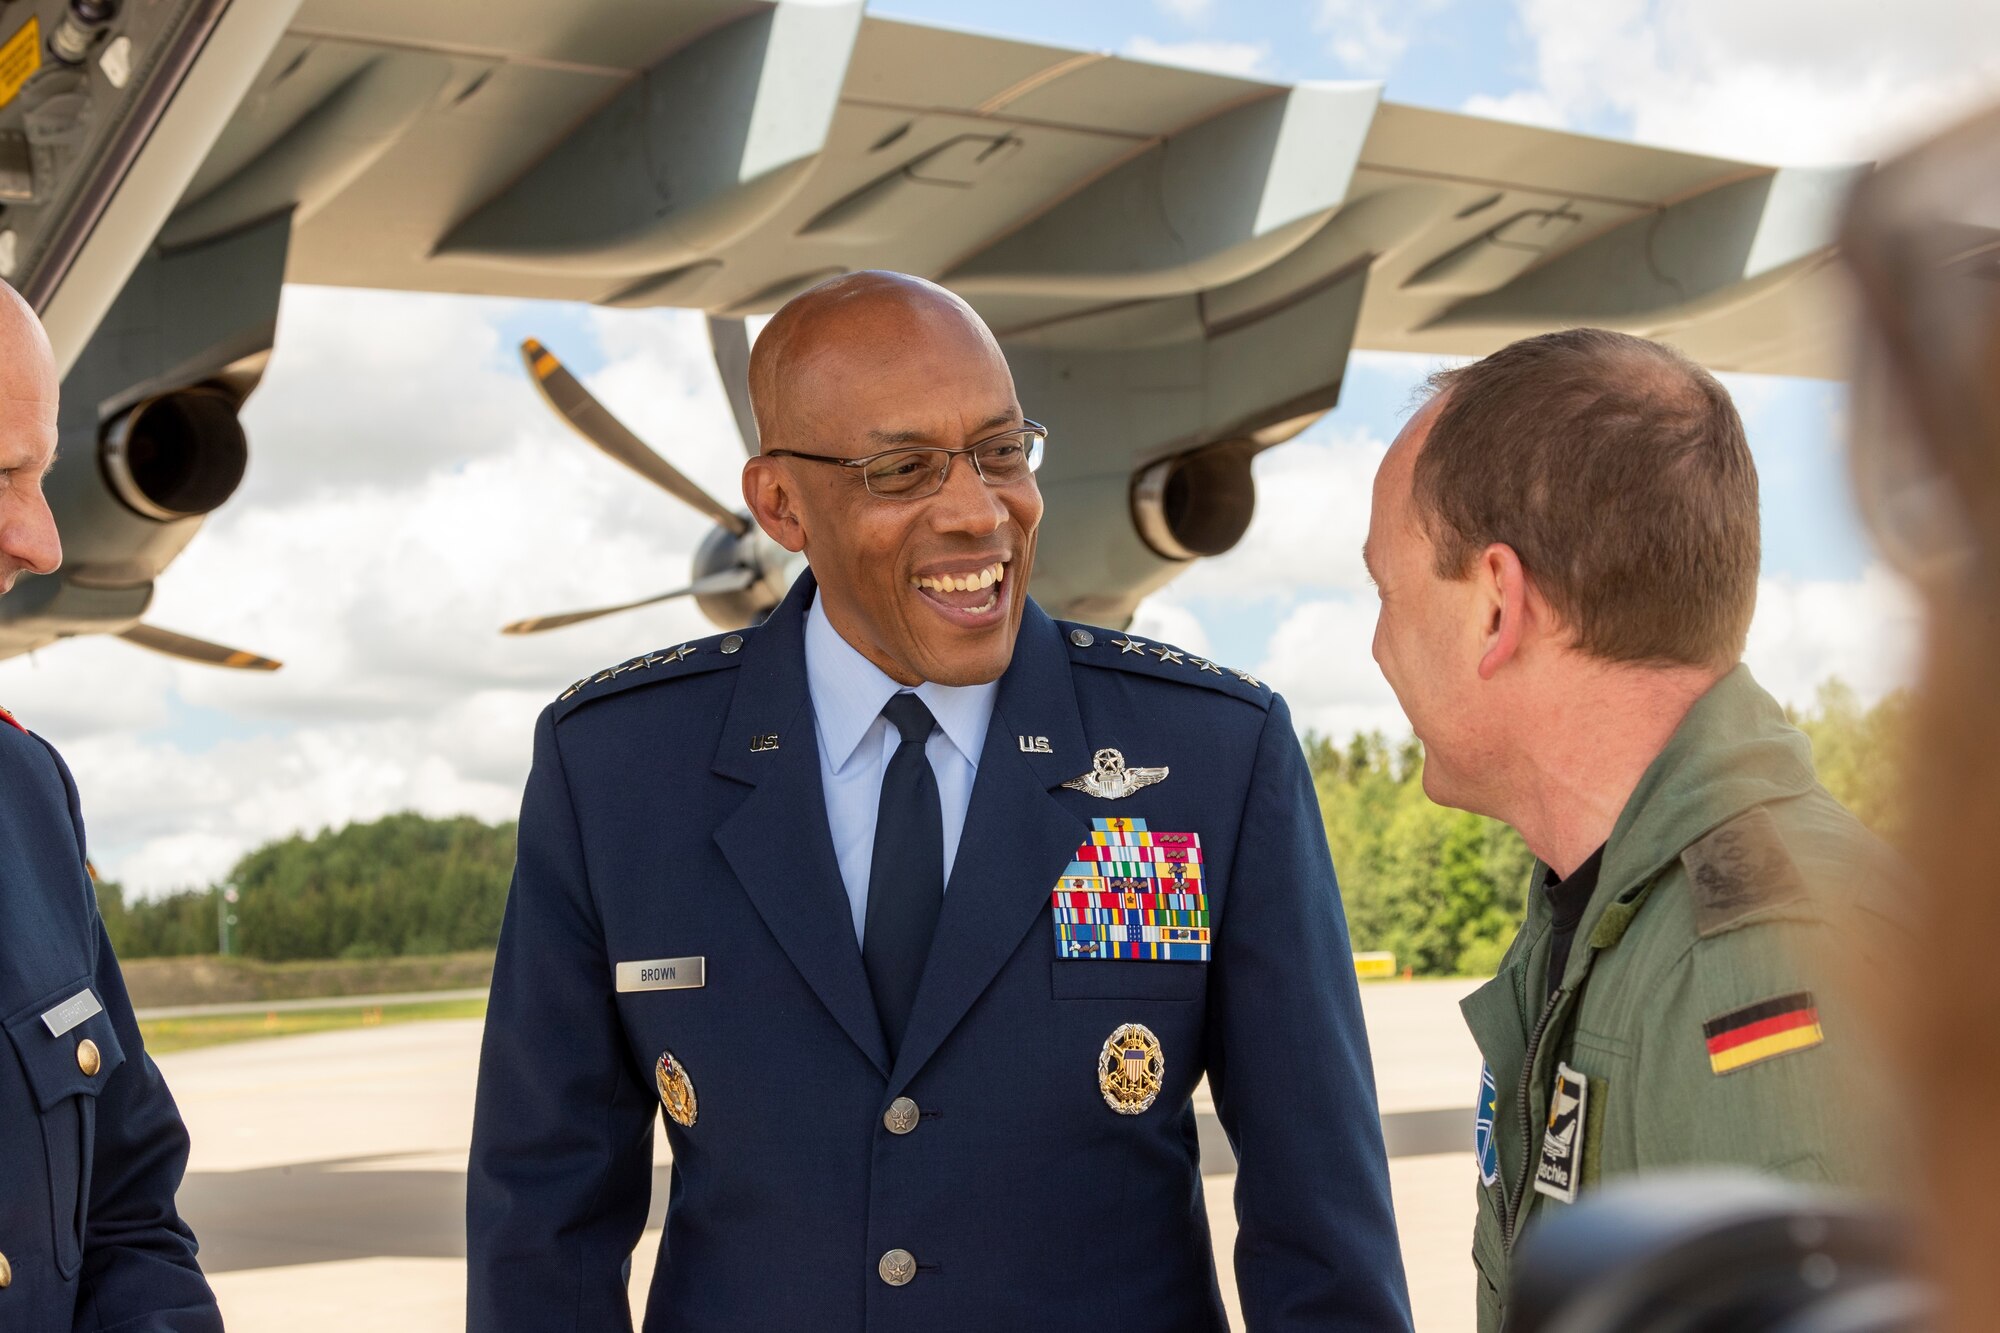 U.S. Air Force Chief of Staff Gen. CQ Brown, Jr. meets members of the German Air Force at Rostock-Laage Airfield, Germany, July 11, 2022. Brown and German Air Chief Lt. Gen. Ingo Gerhartz flew in formation over the Baltic Sea to strengthen ties between the two nations. (German Air Force photo by Sebastian Thomas)